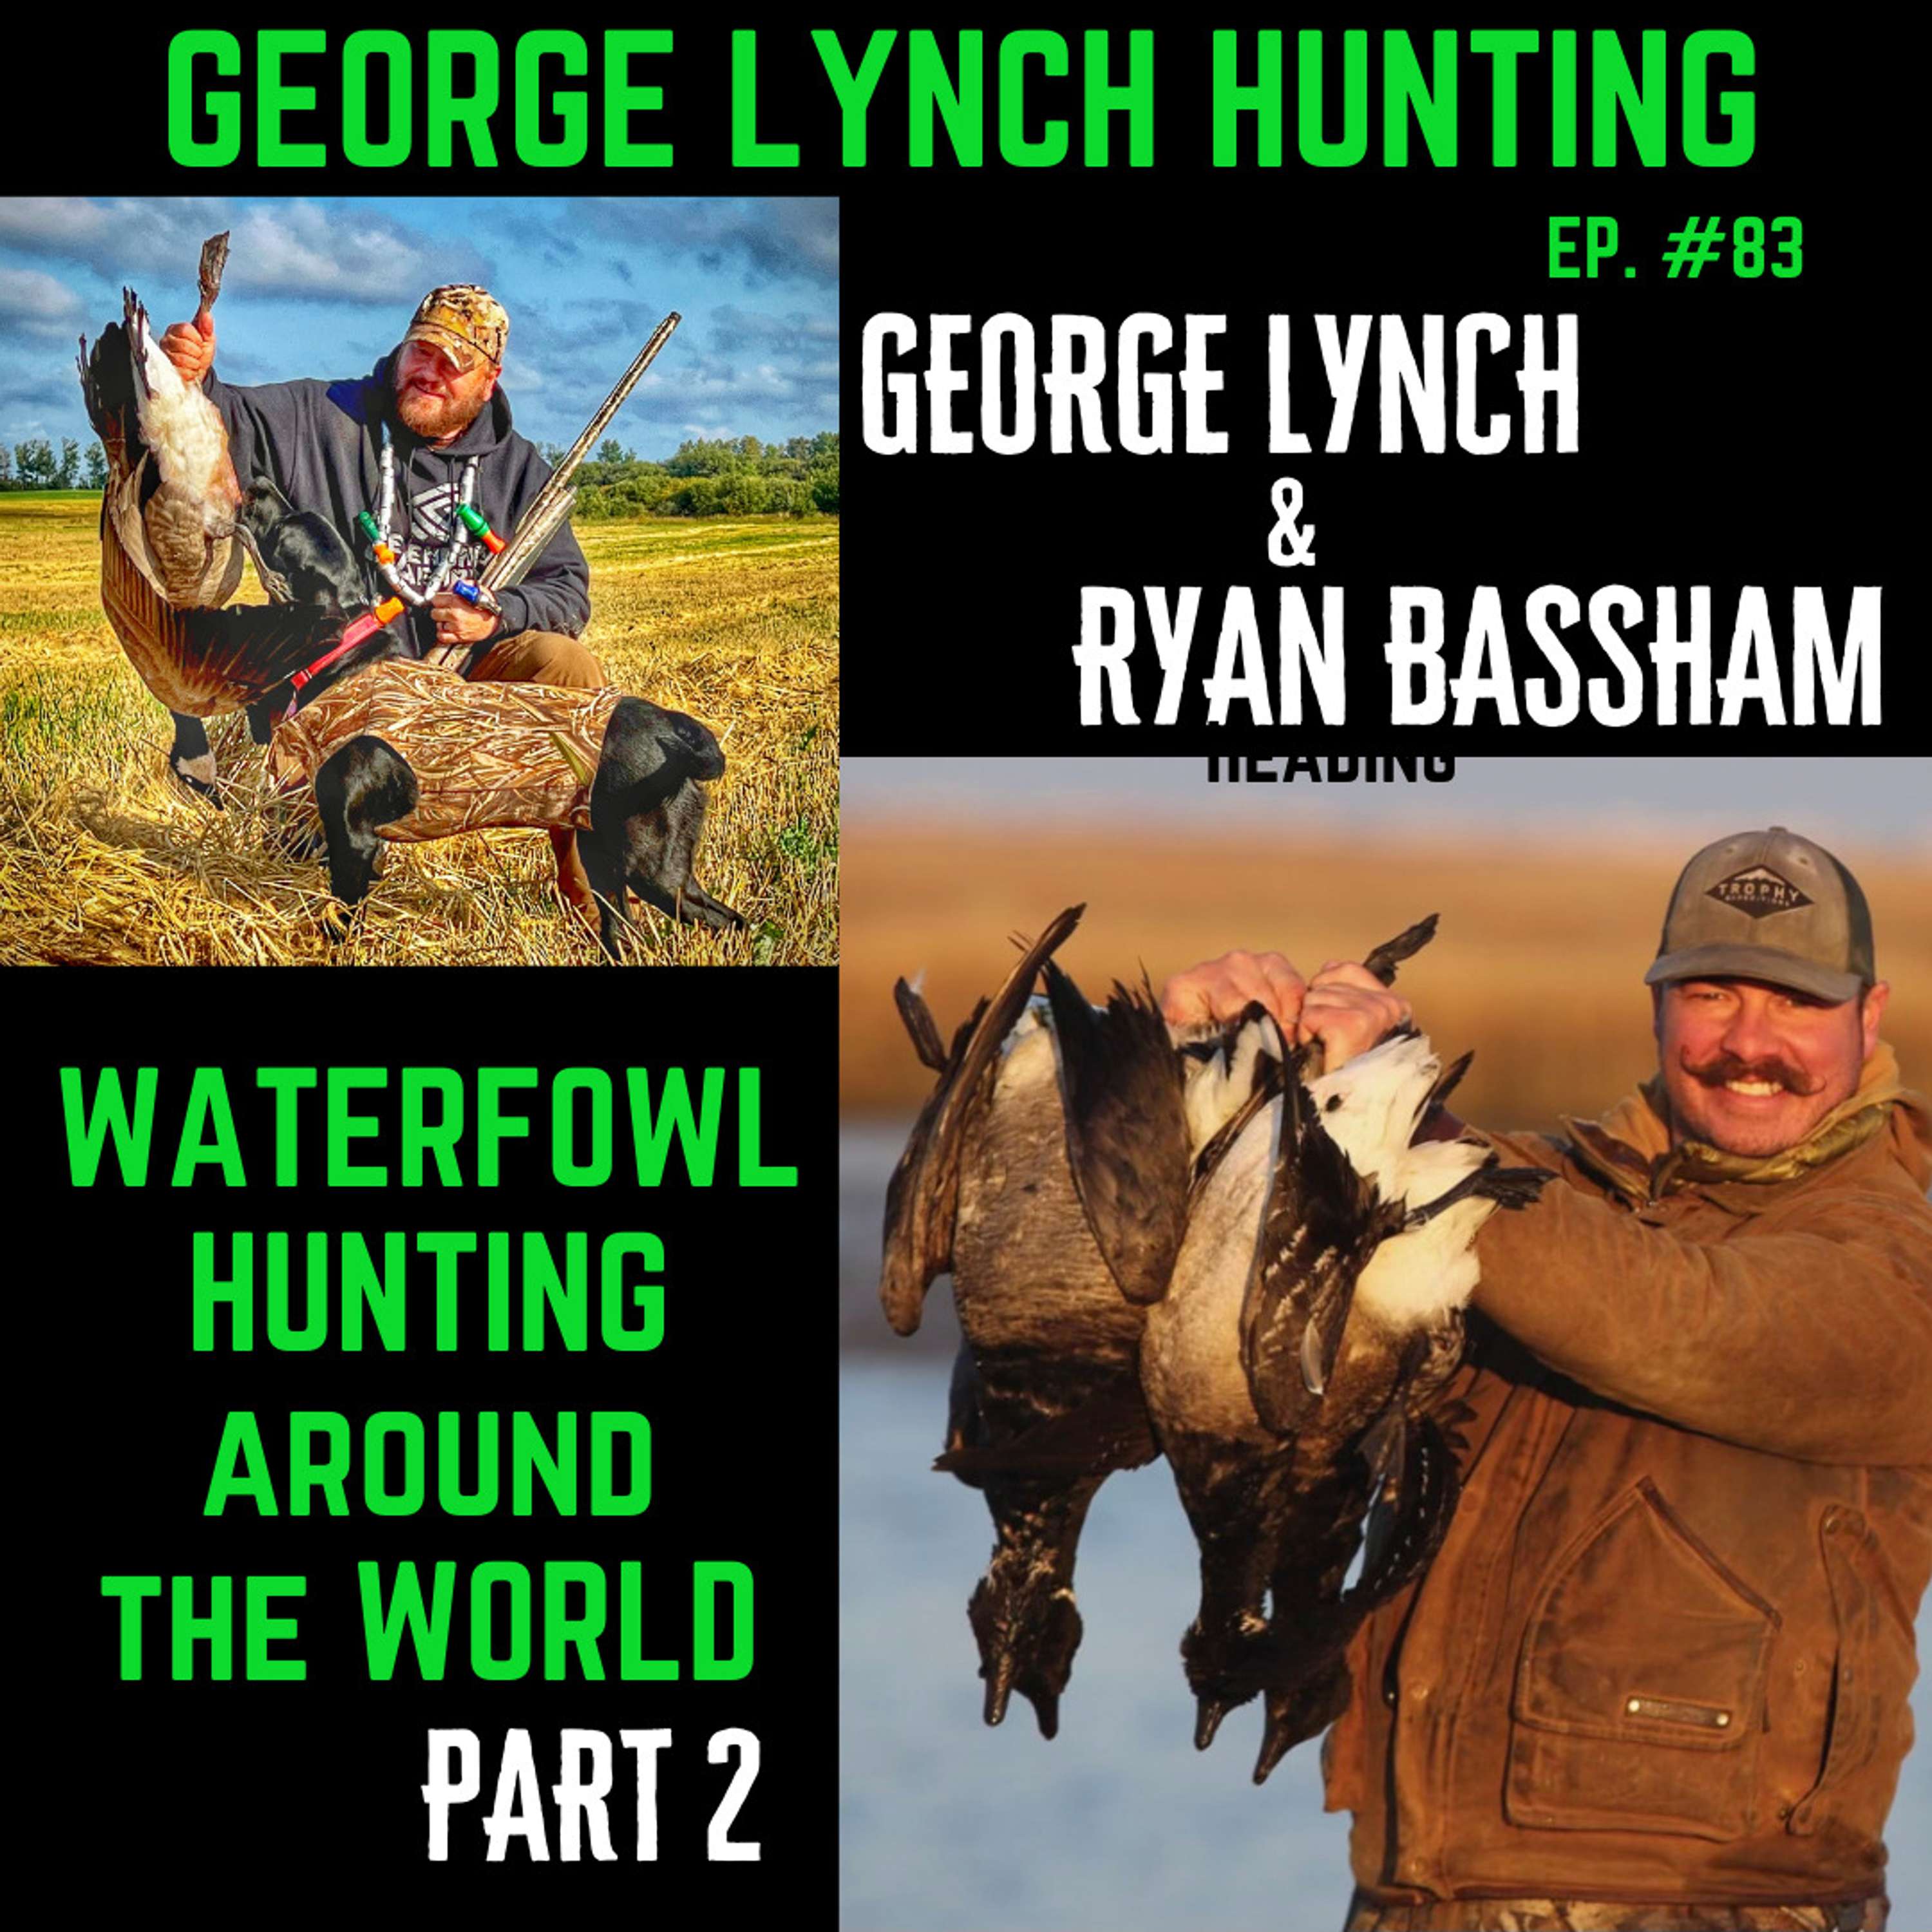 WATERFOWL HUNTING AROUND THE WORLD with RYAN BASSHAM and GEORGE LYNCH - PART 2of2